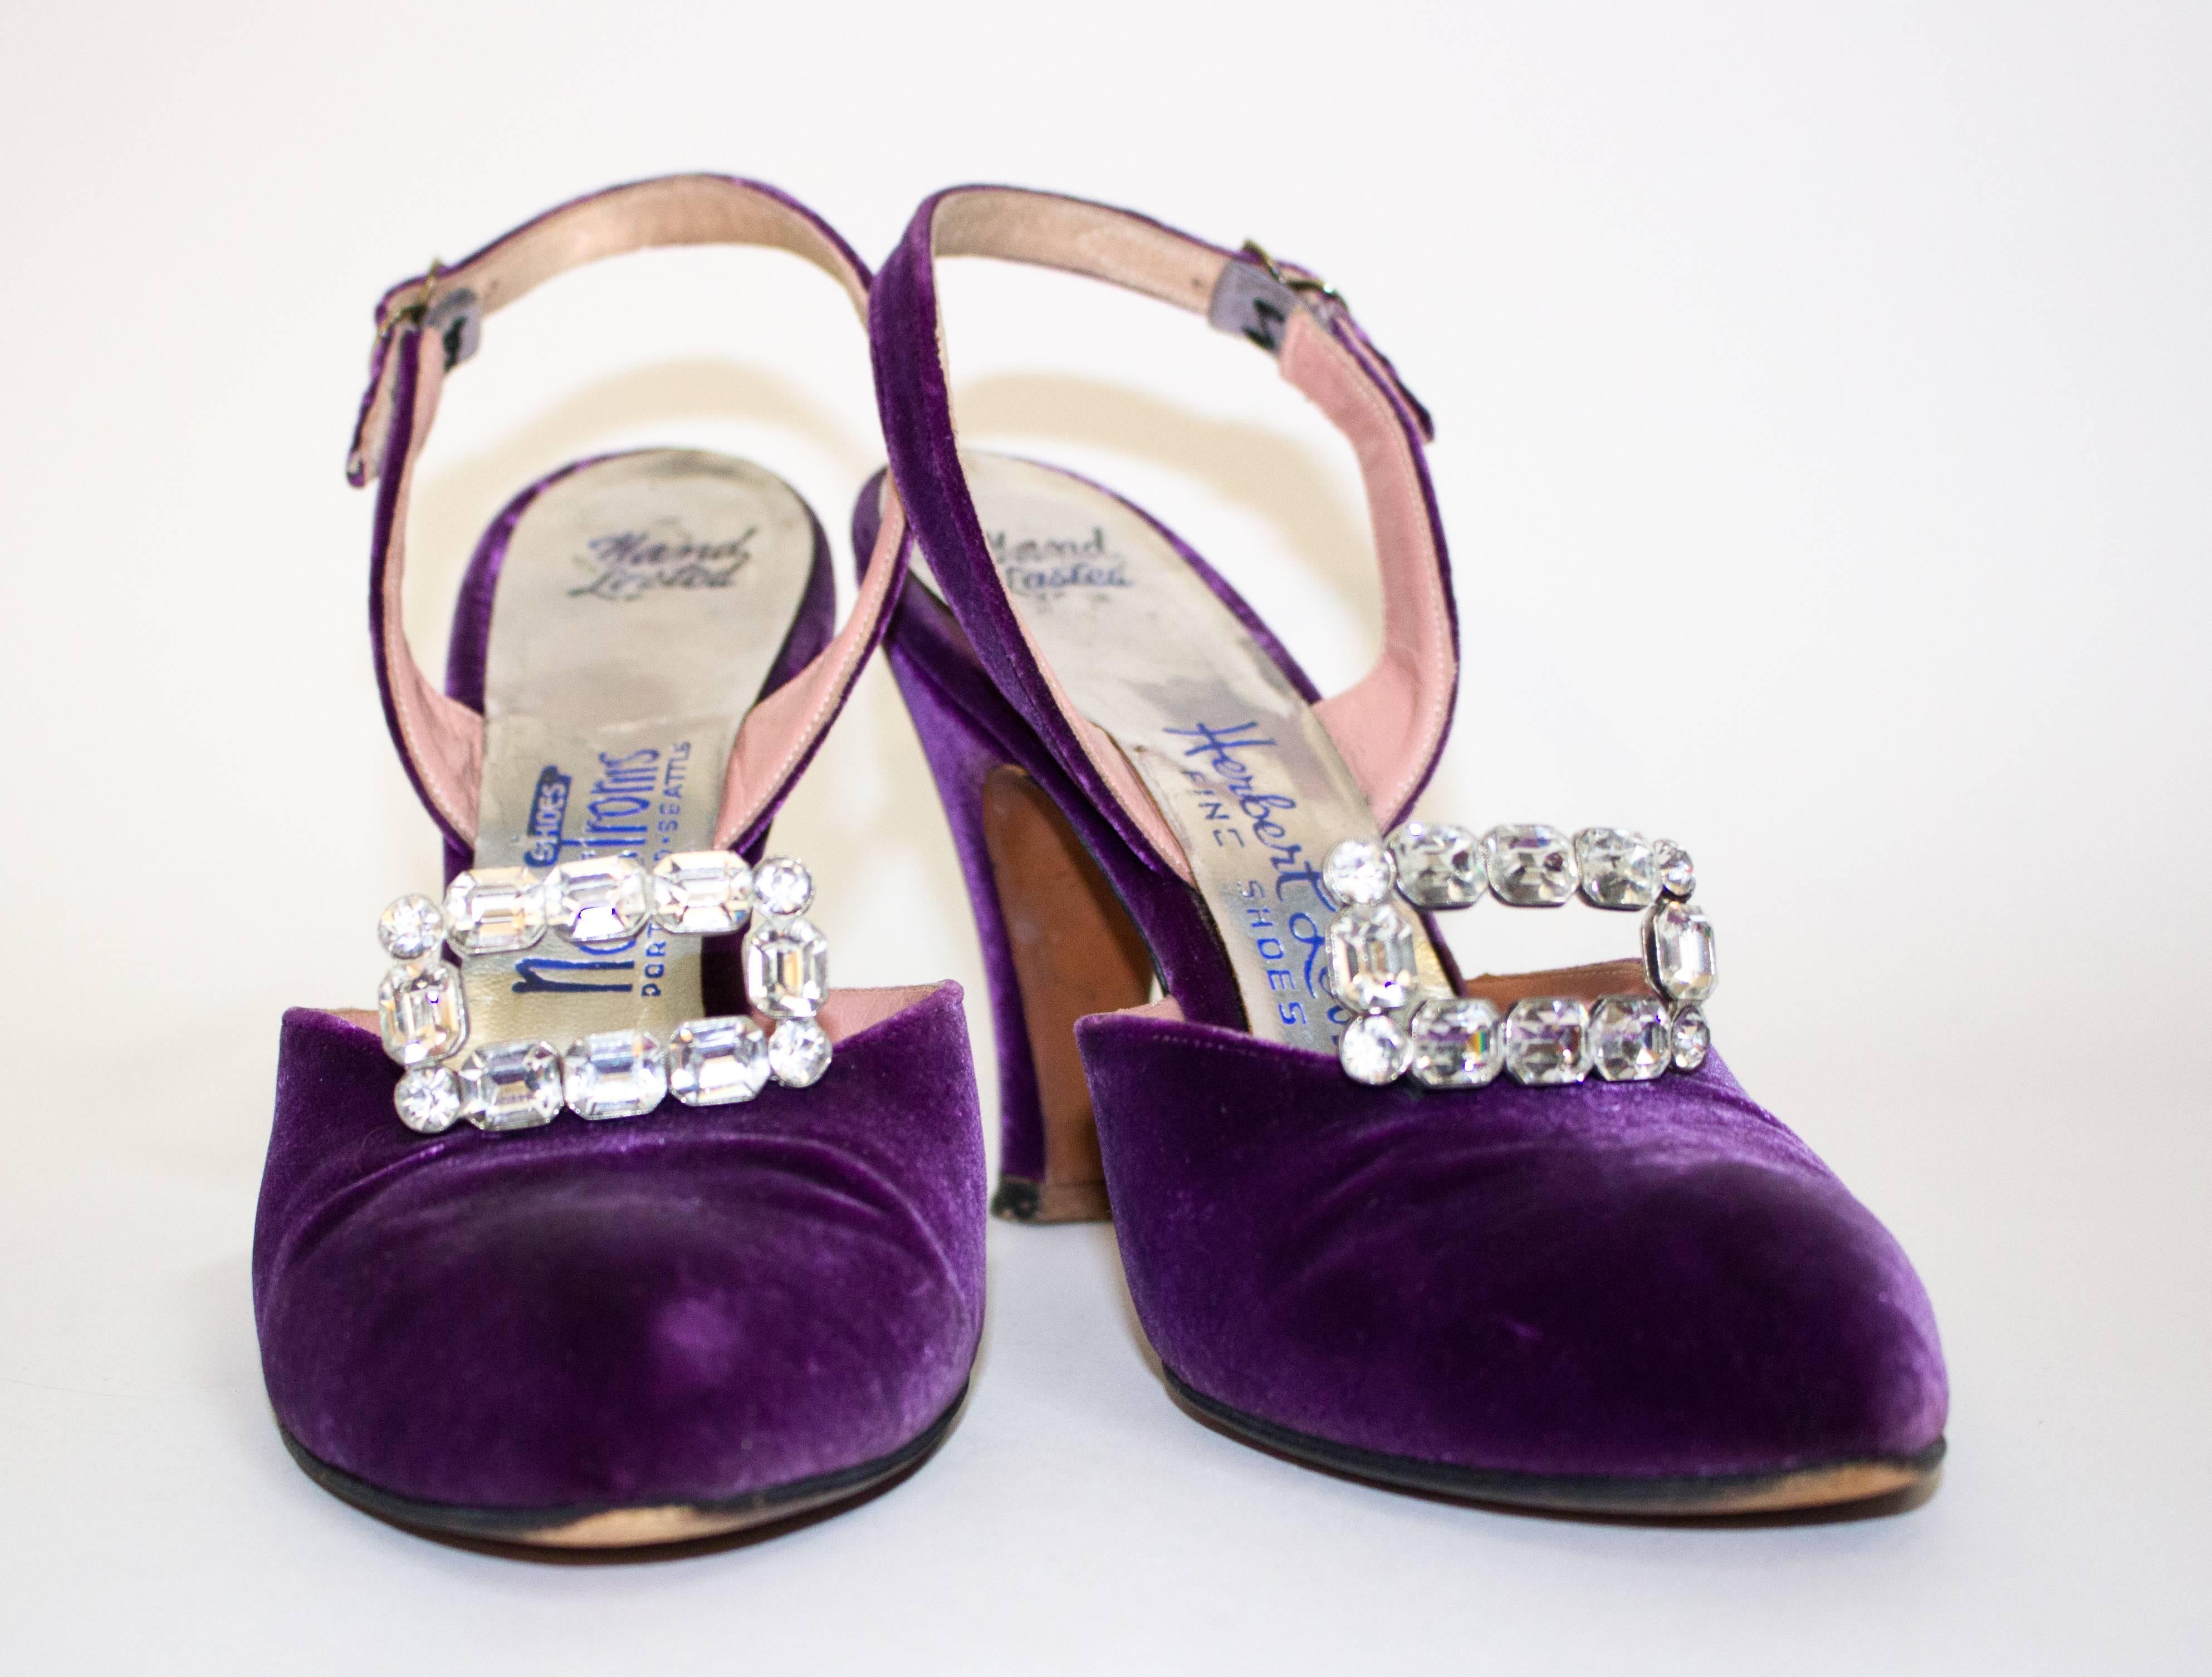 50s purple velvet slingback heels with rhinestone adornments. Leather soles 

Heel hight - 4"
Insole - 9 3/4"
Palm of the foot - 2 3/4"

